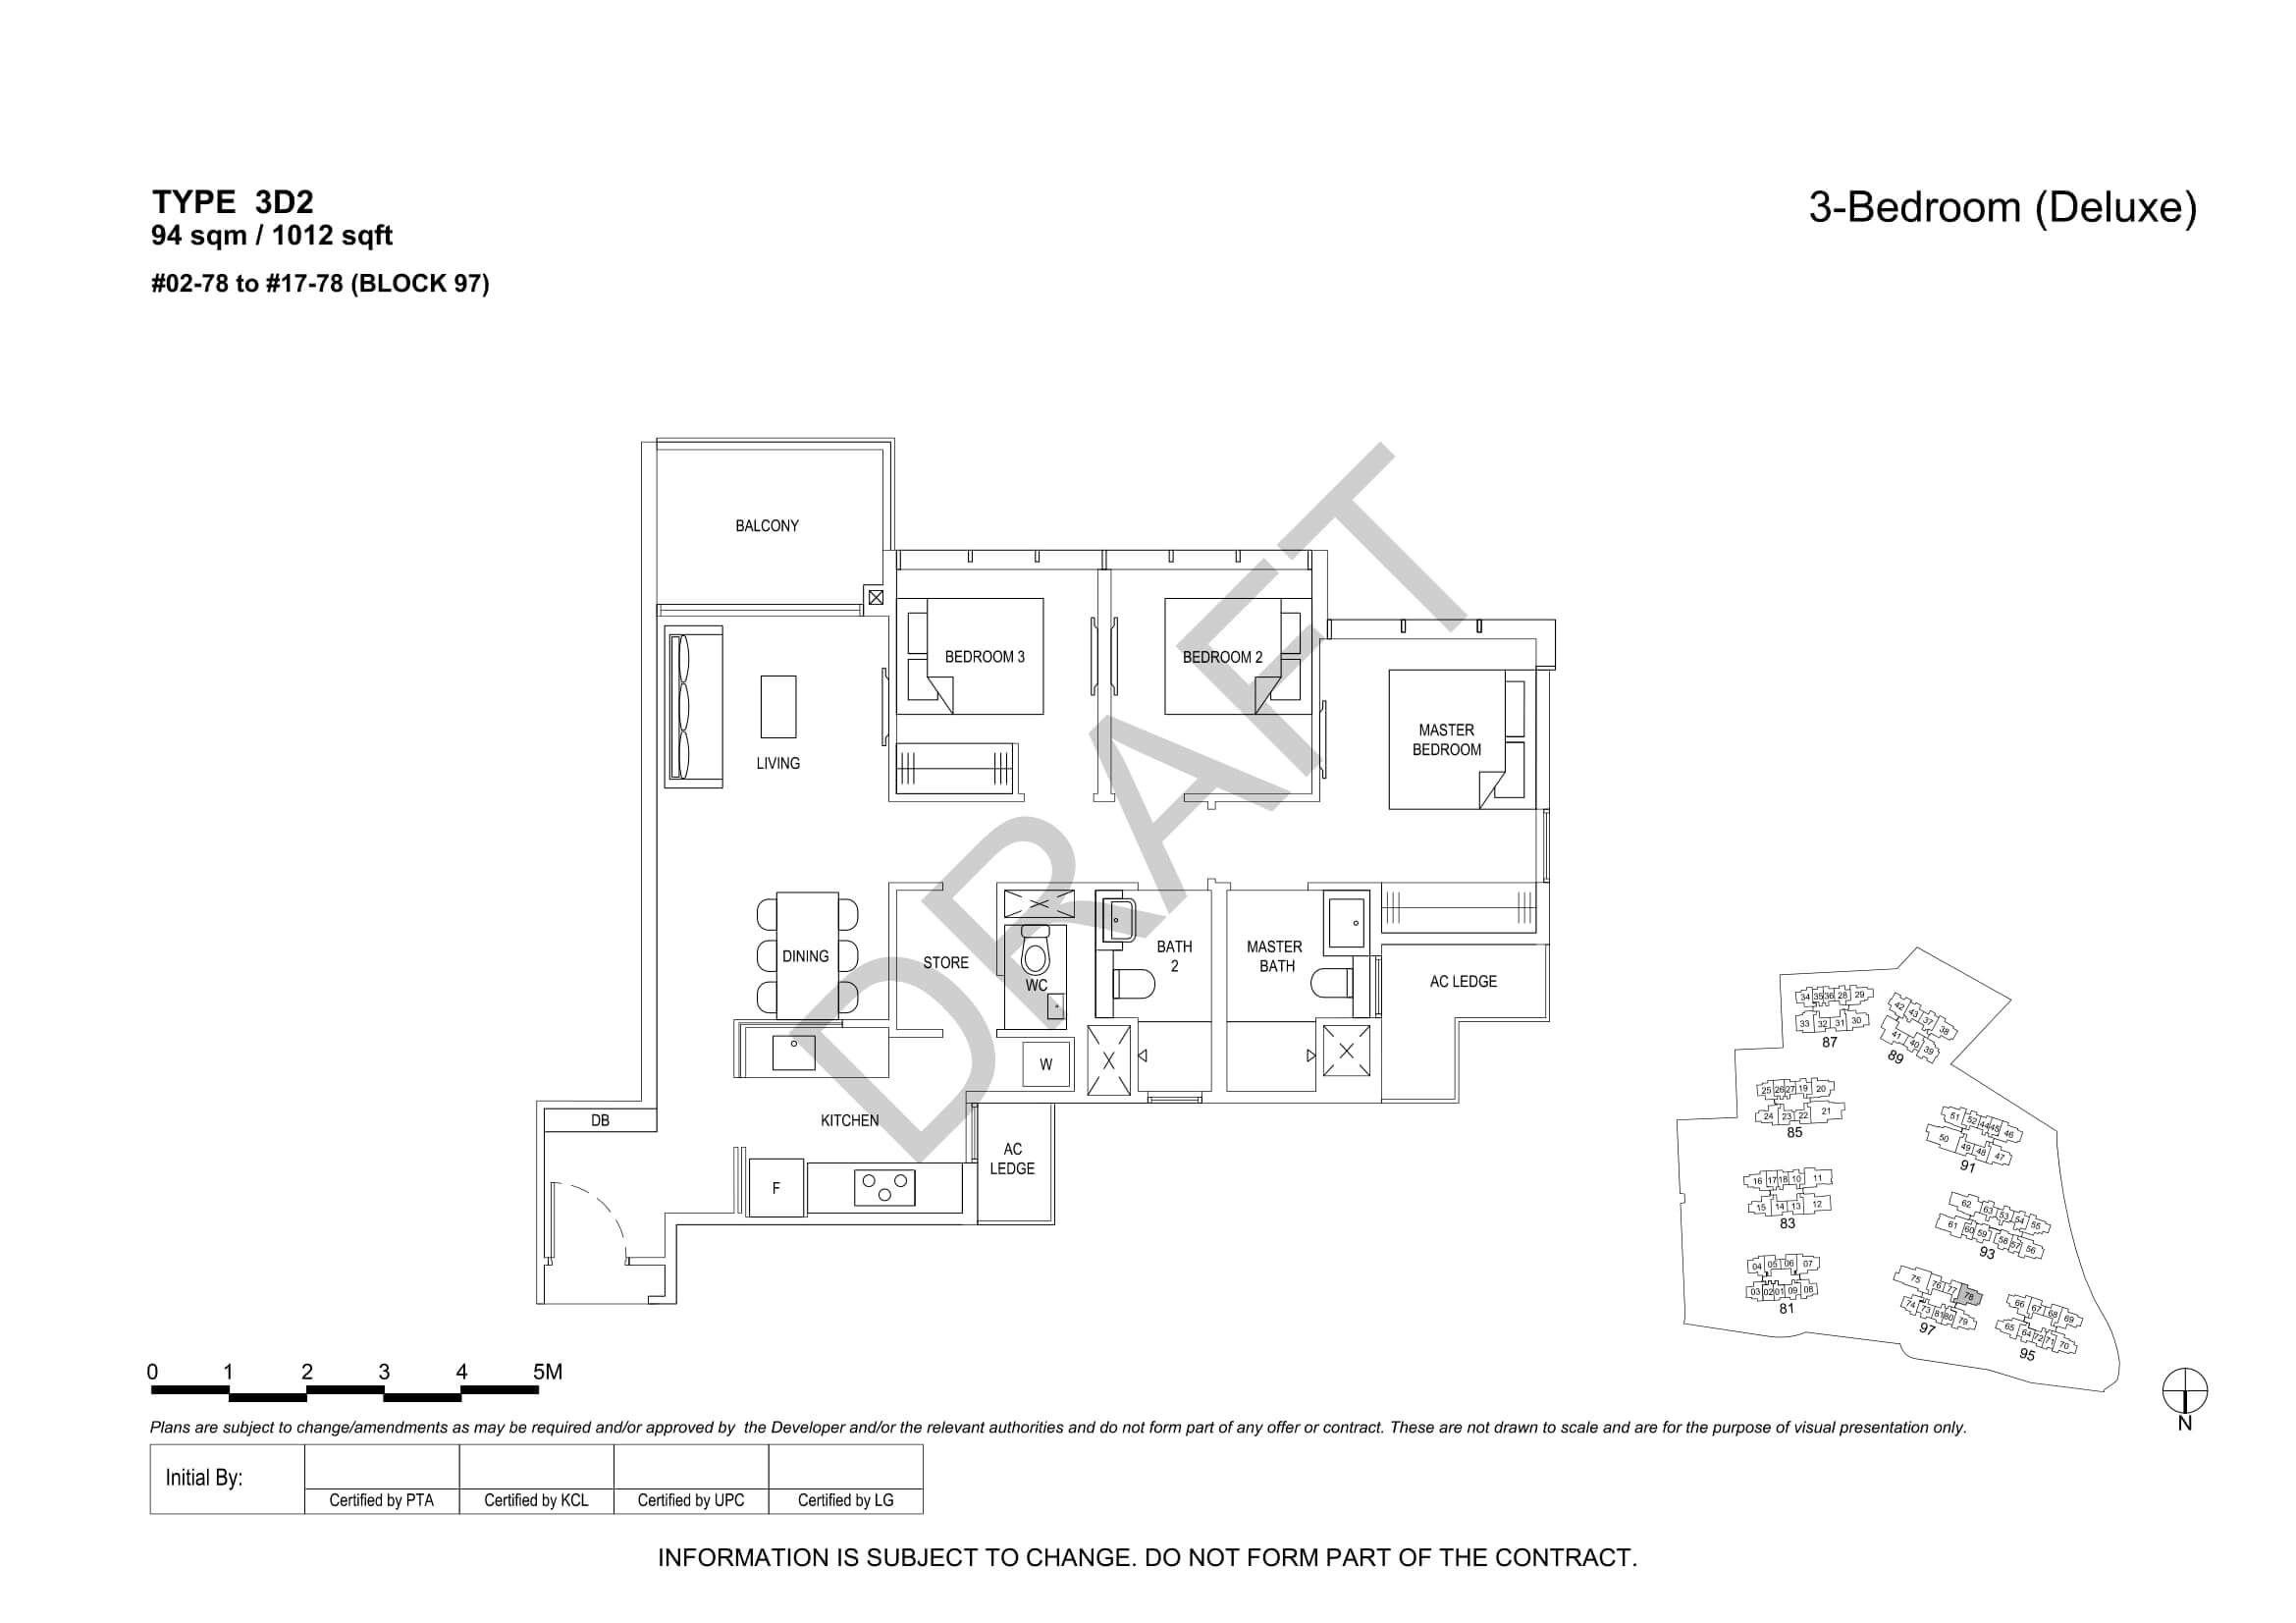 The Florence Residences Floor Plan 3-Bedroom Type 3D2